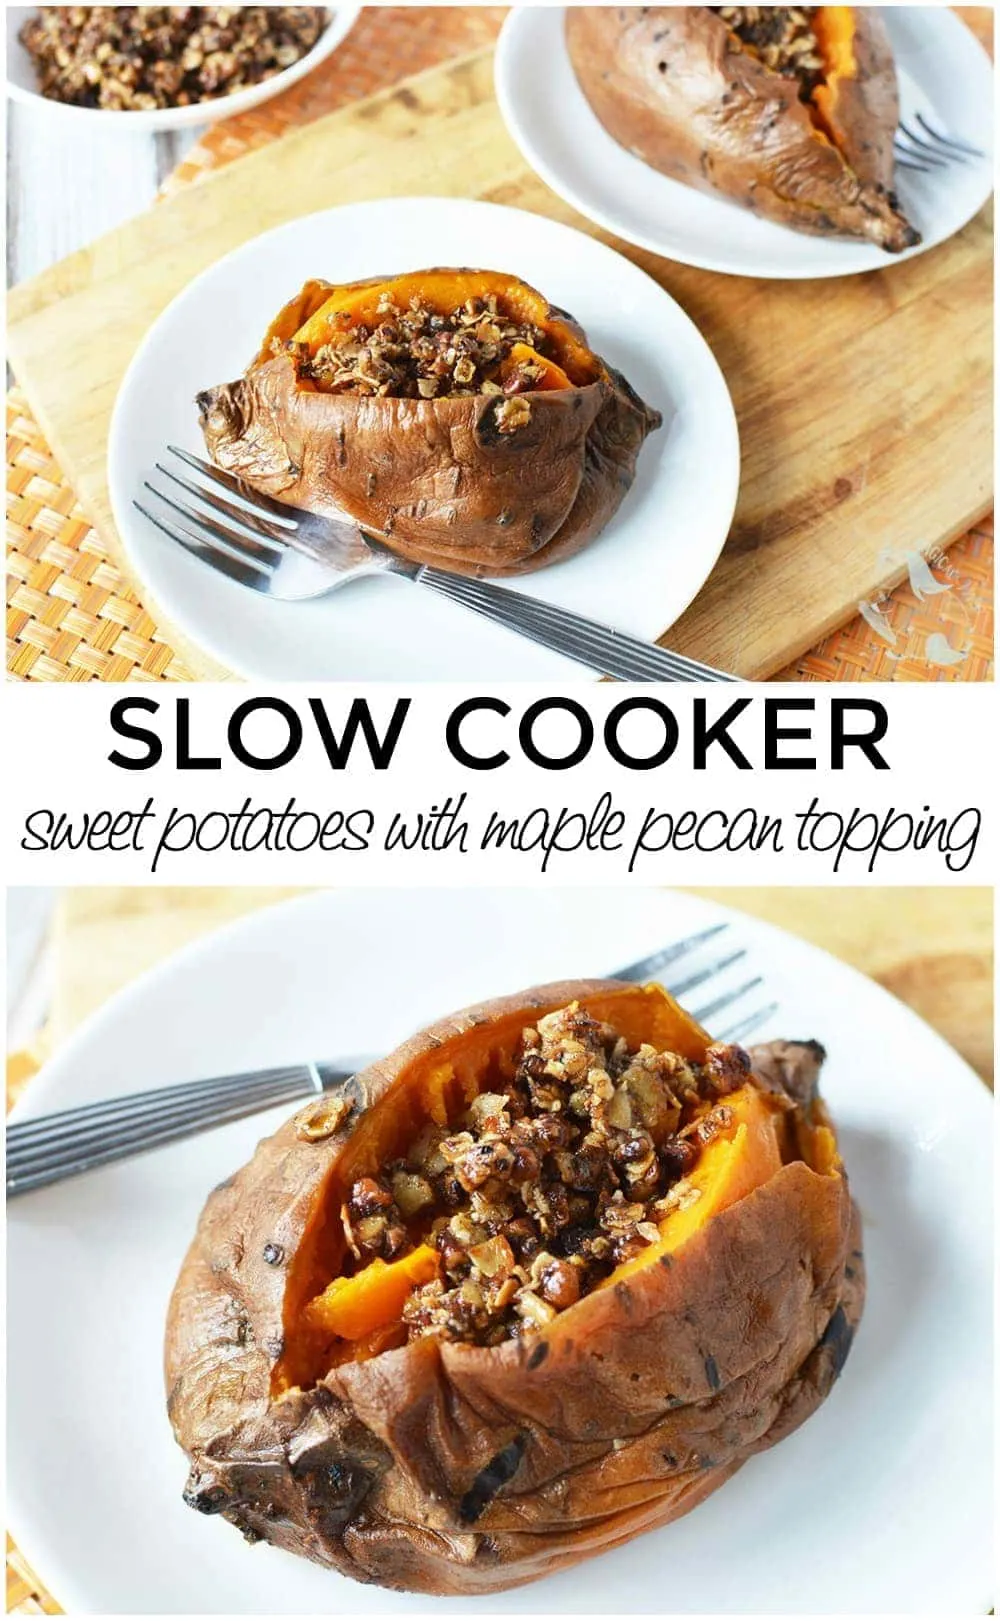 Slow Cooker Sweet Potatoes with Maple Pecan Topping Recipe